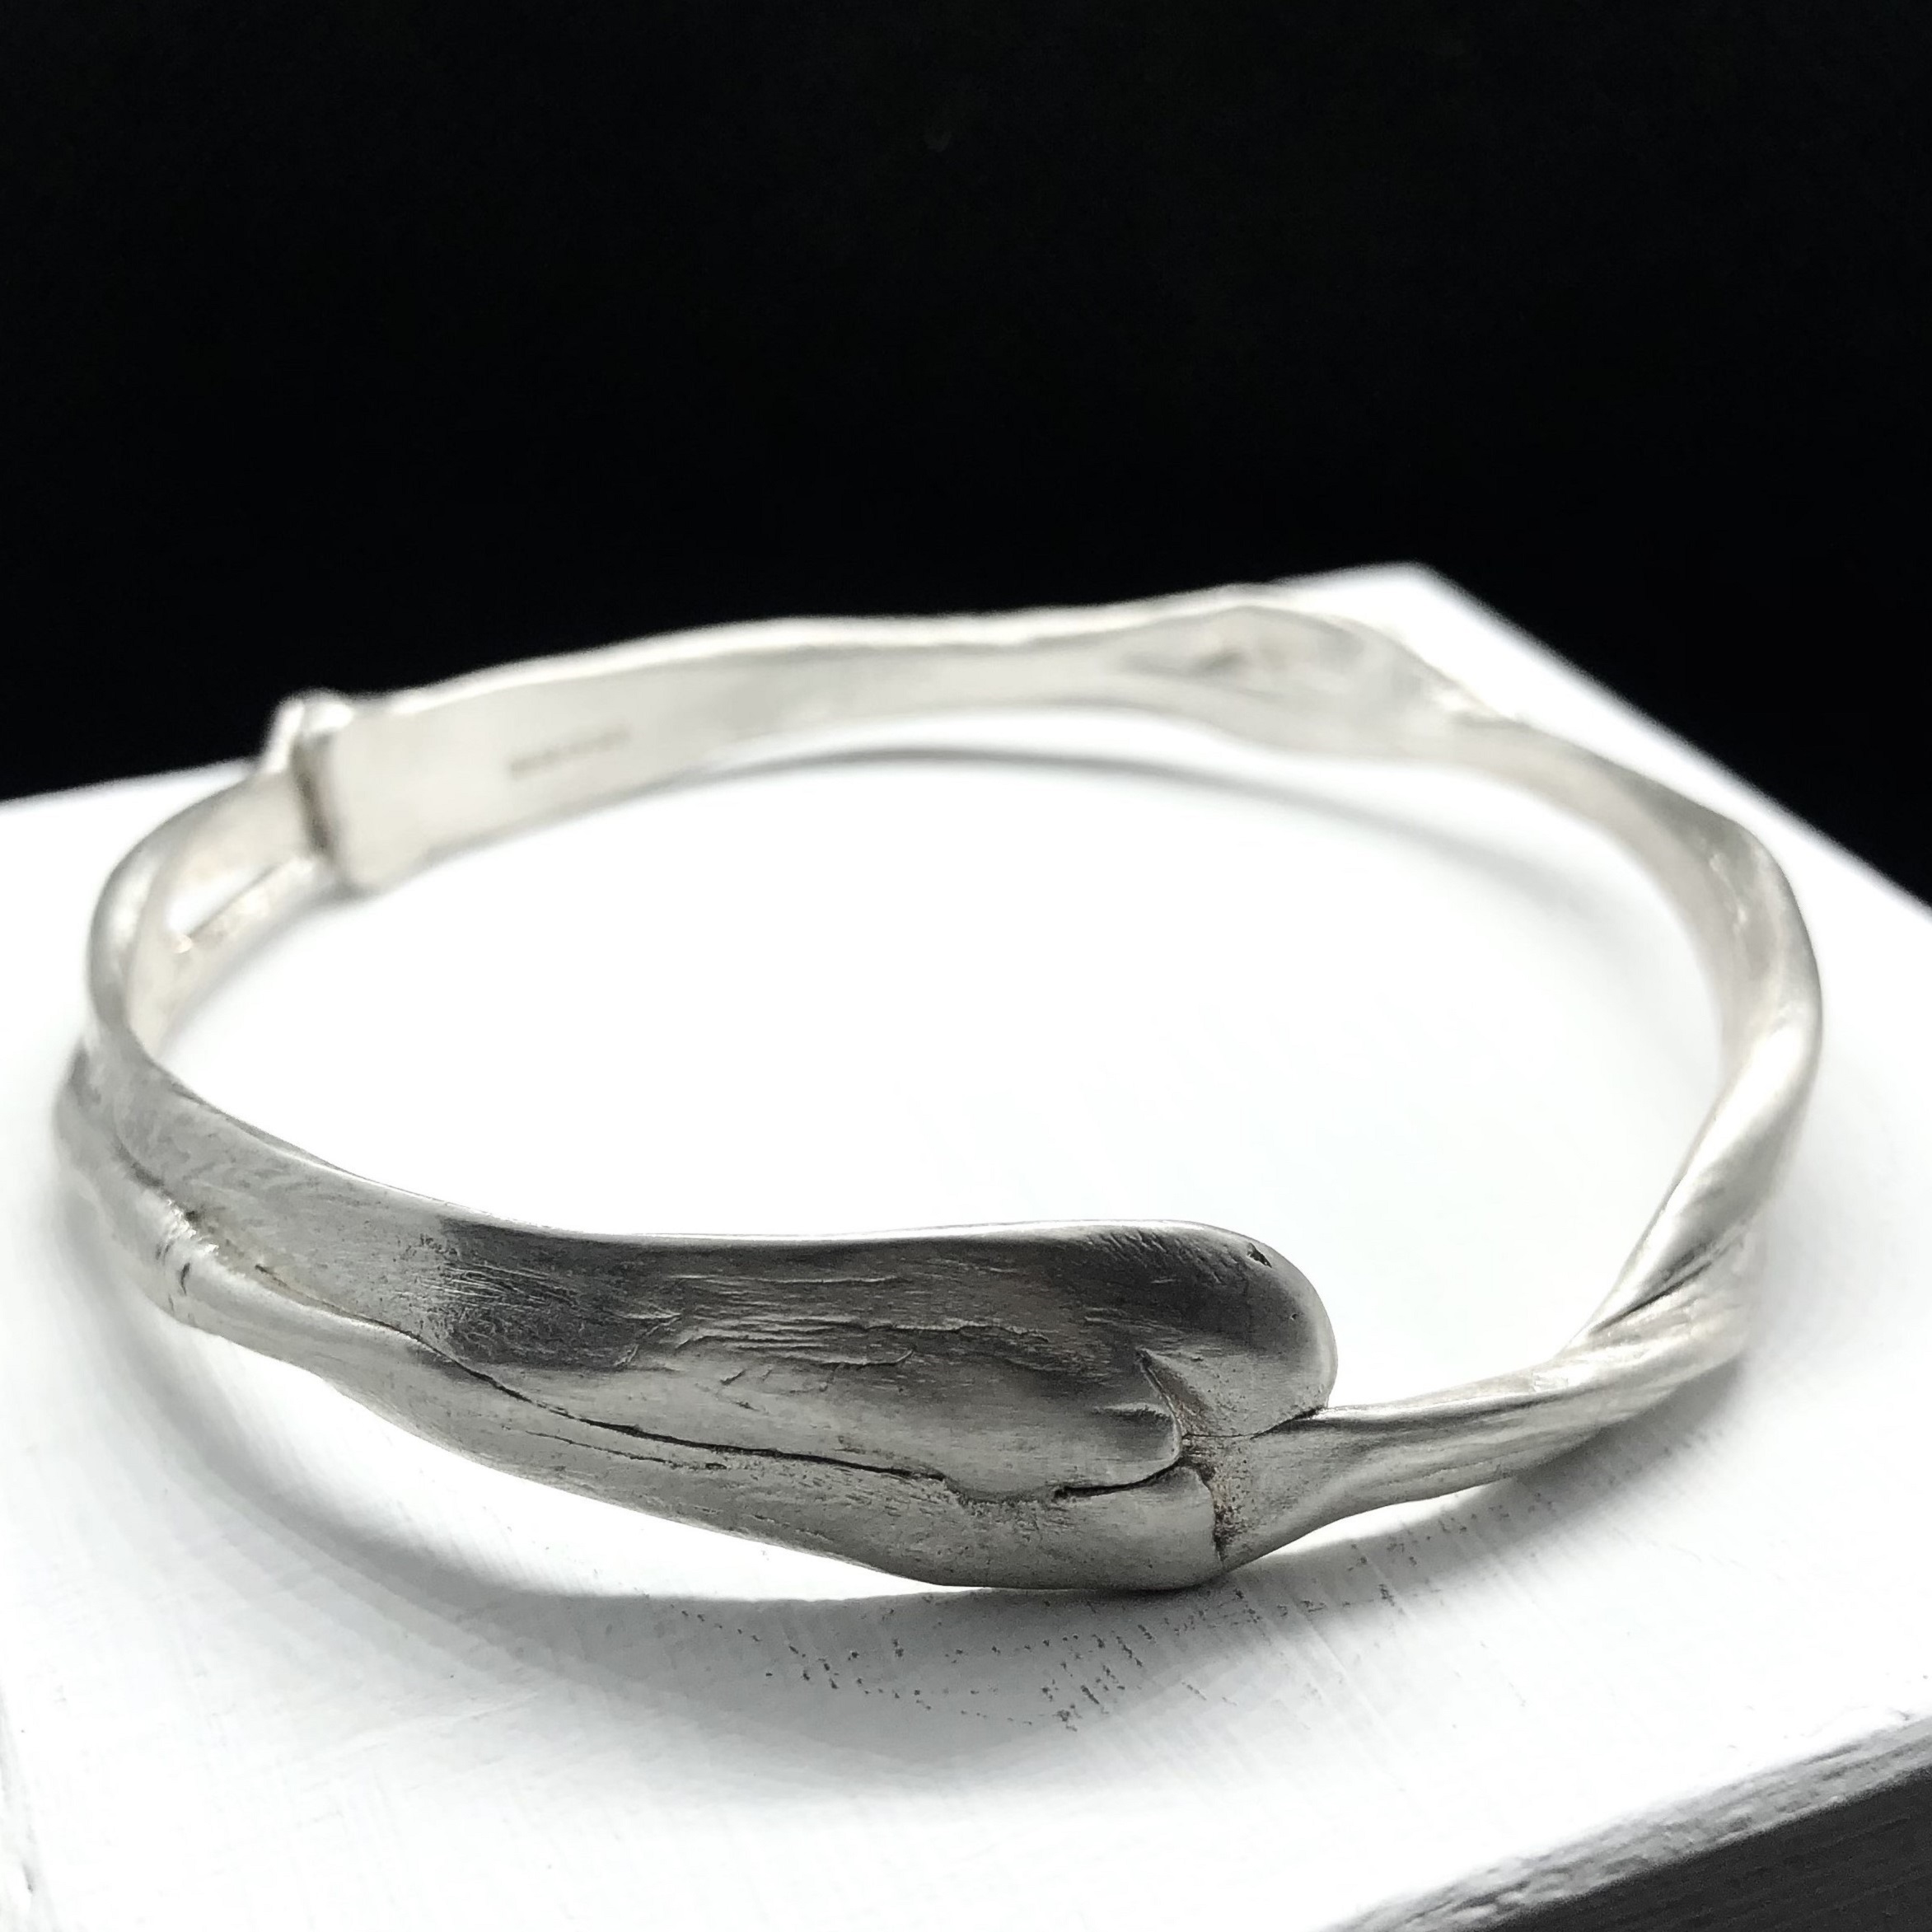 Charlotte E Padgham SKINS 100% recycled Sterling silver bracelet 2a